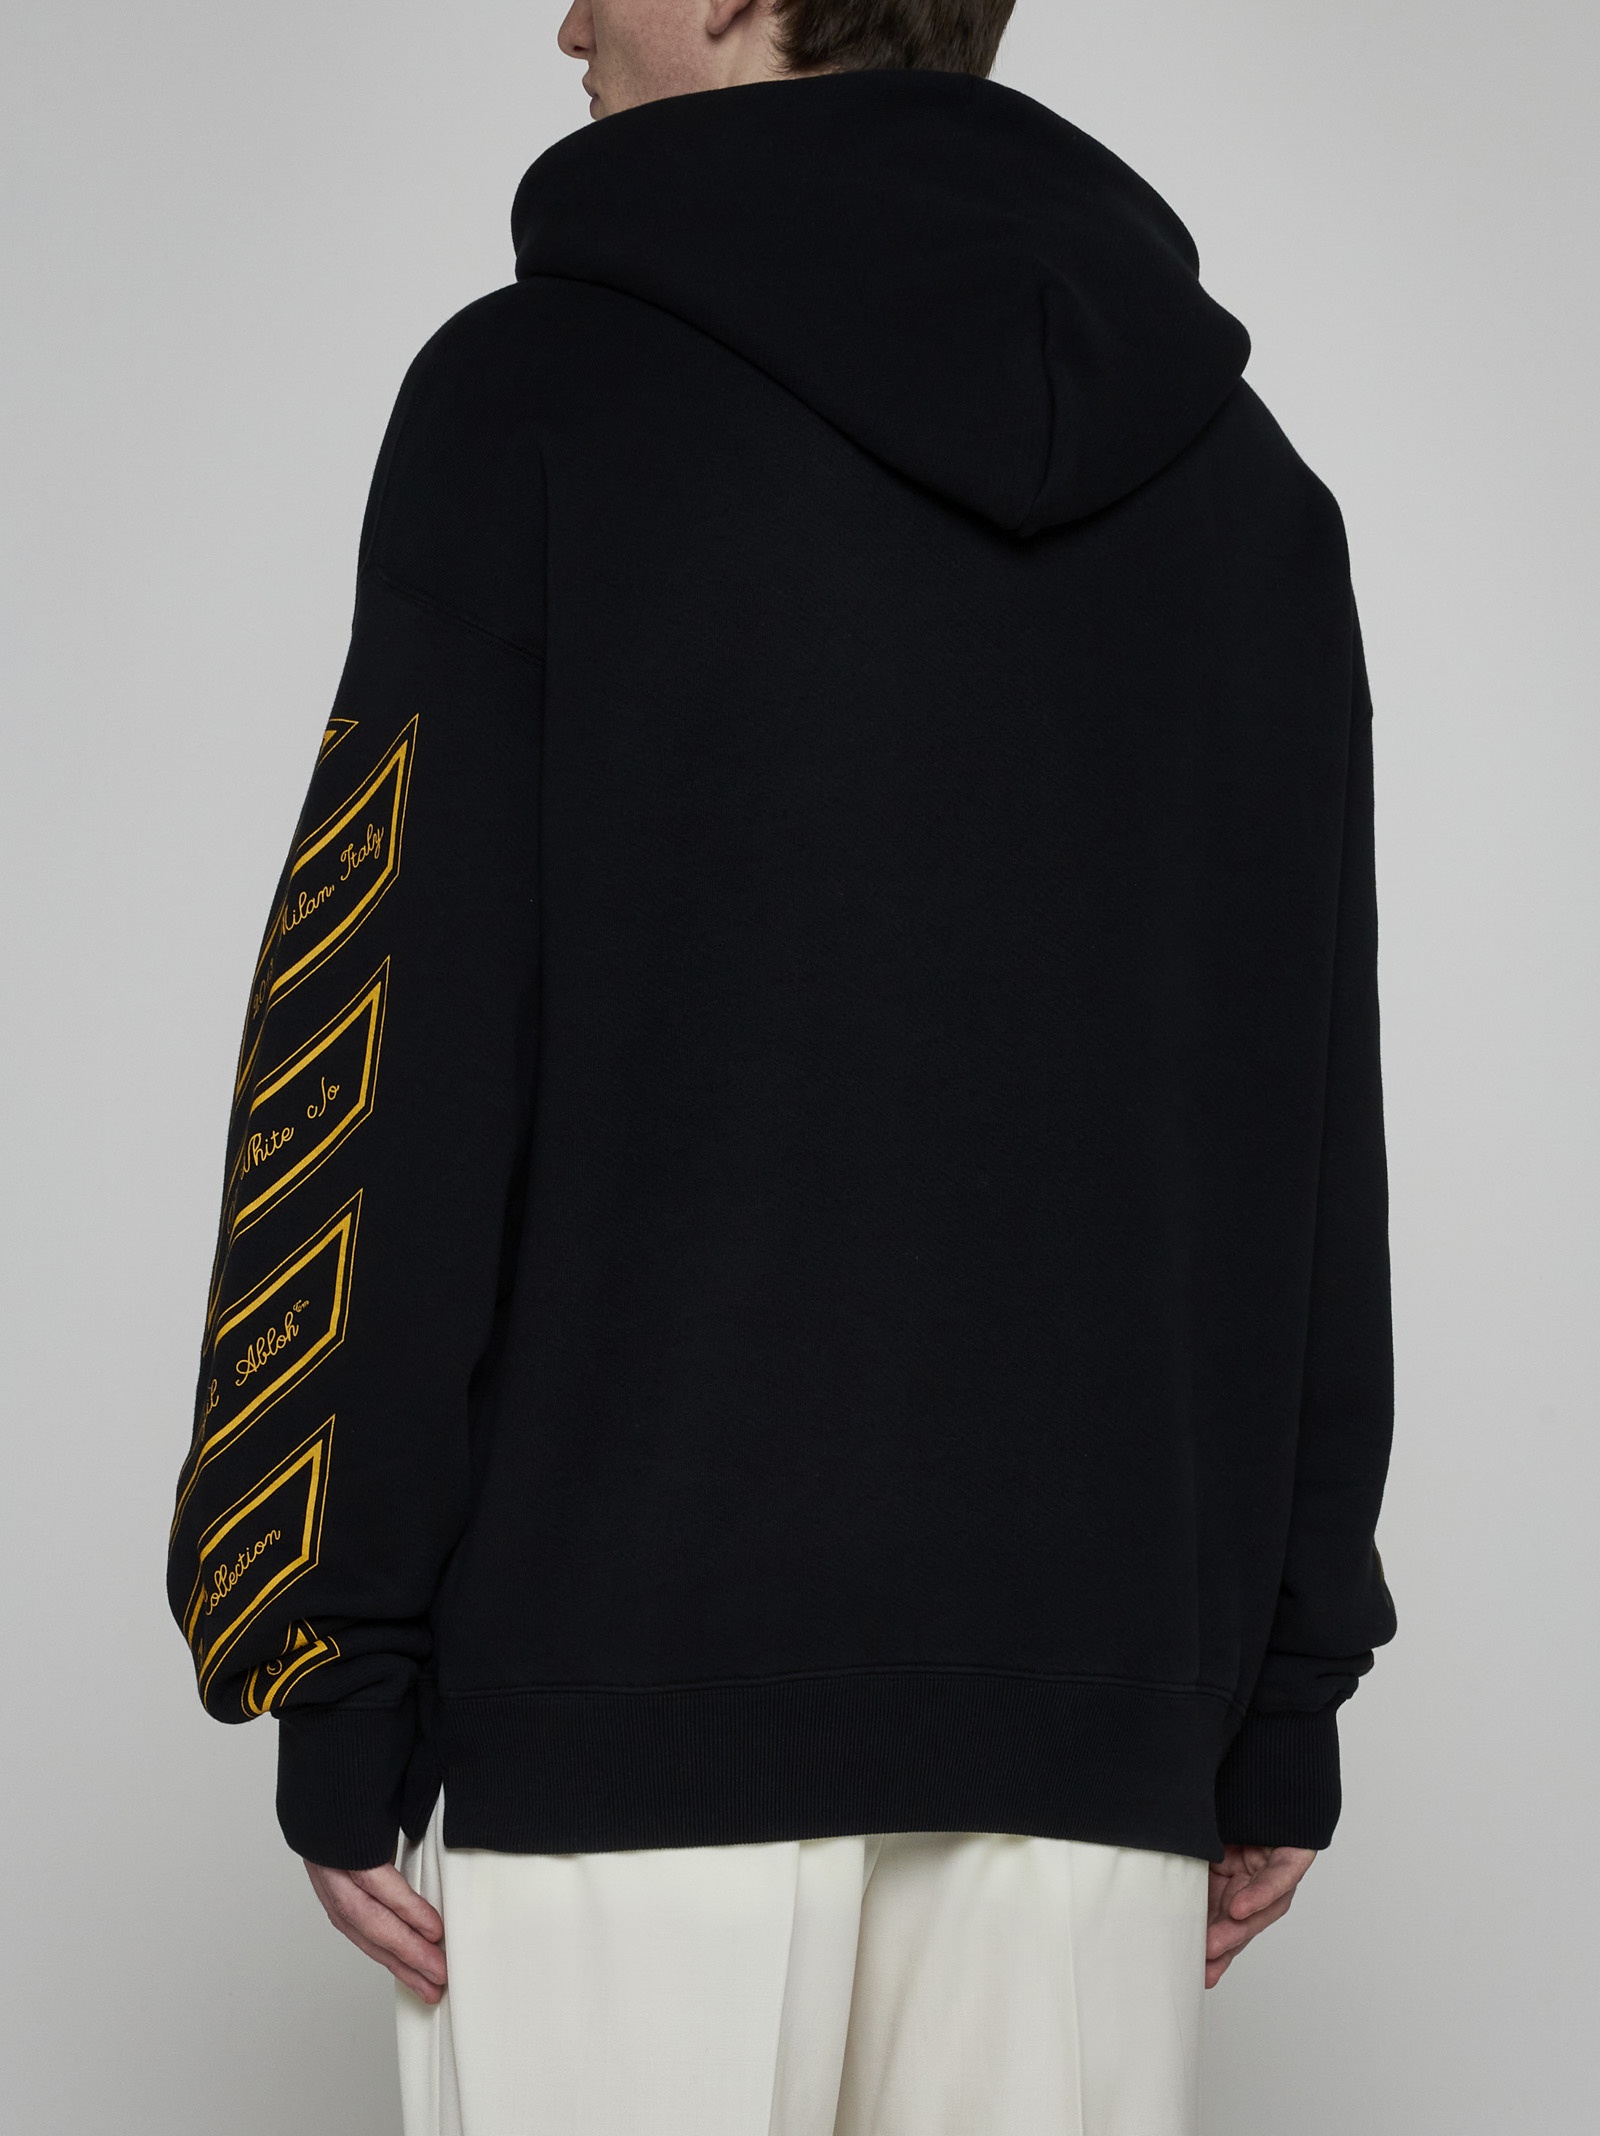 OW 23 cotton hoodie - 4